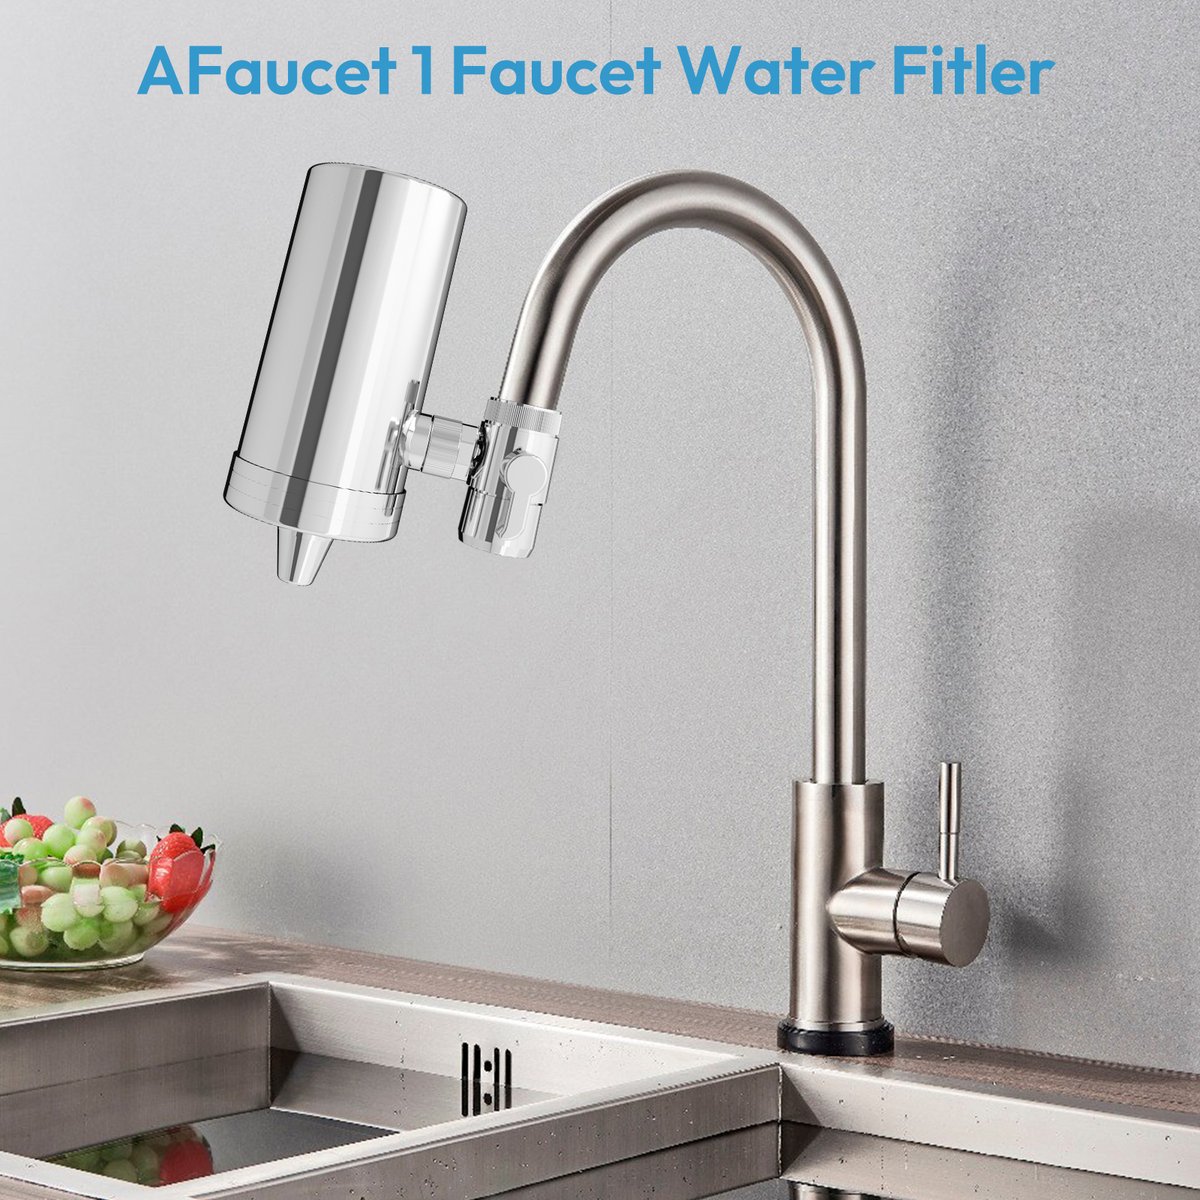 Say farewell to odor!🤢 NSF-certified high-quality coconut shell activated carbon filter effectively removes odors and gives drinking water a clean and refreshing taste!💦
bit.ly/350PuUo
#faucetwaterfilter #WaterFiltersystem #drinkmorewater #wellnesstips #costeffective